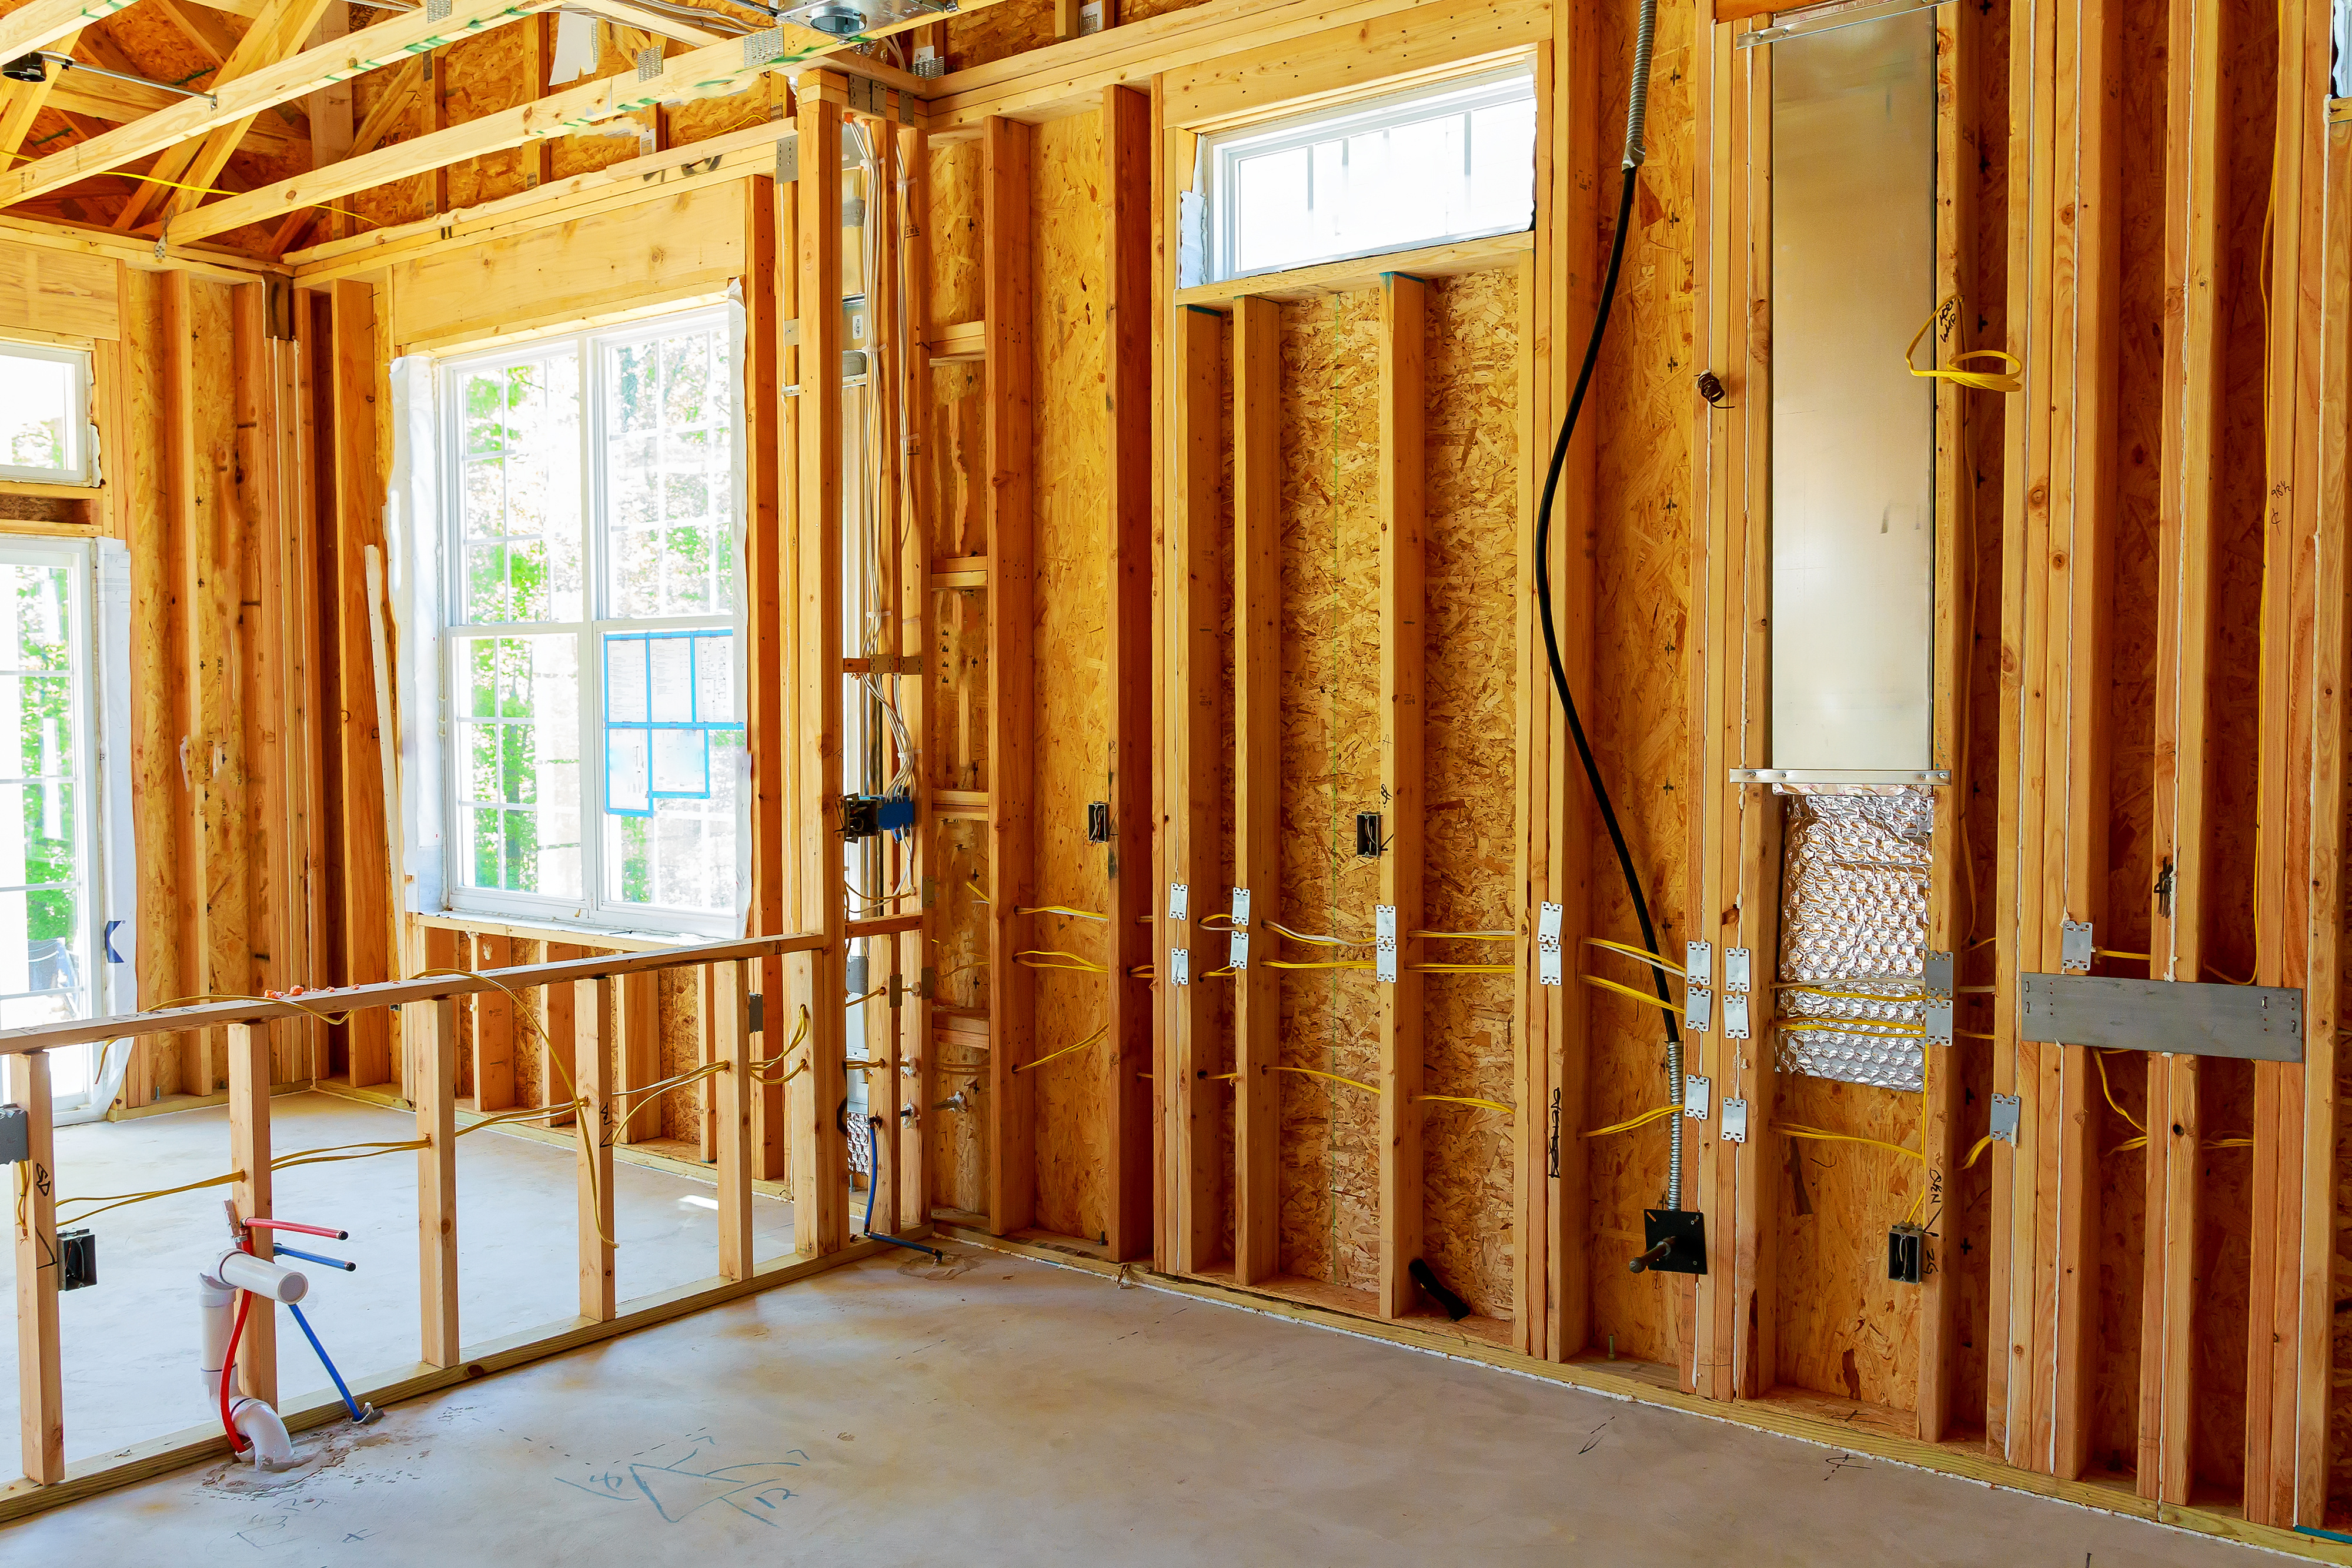 Why is it necessary to renovate an electric house?